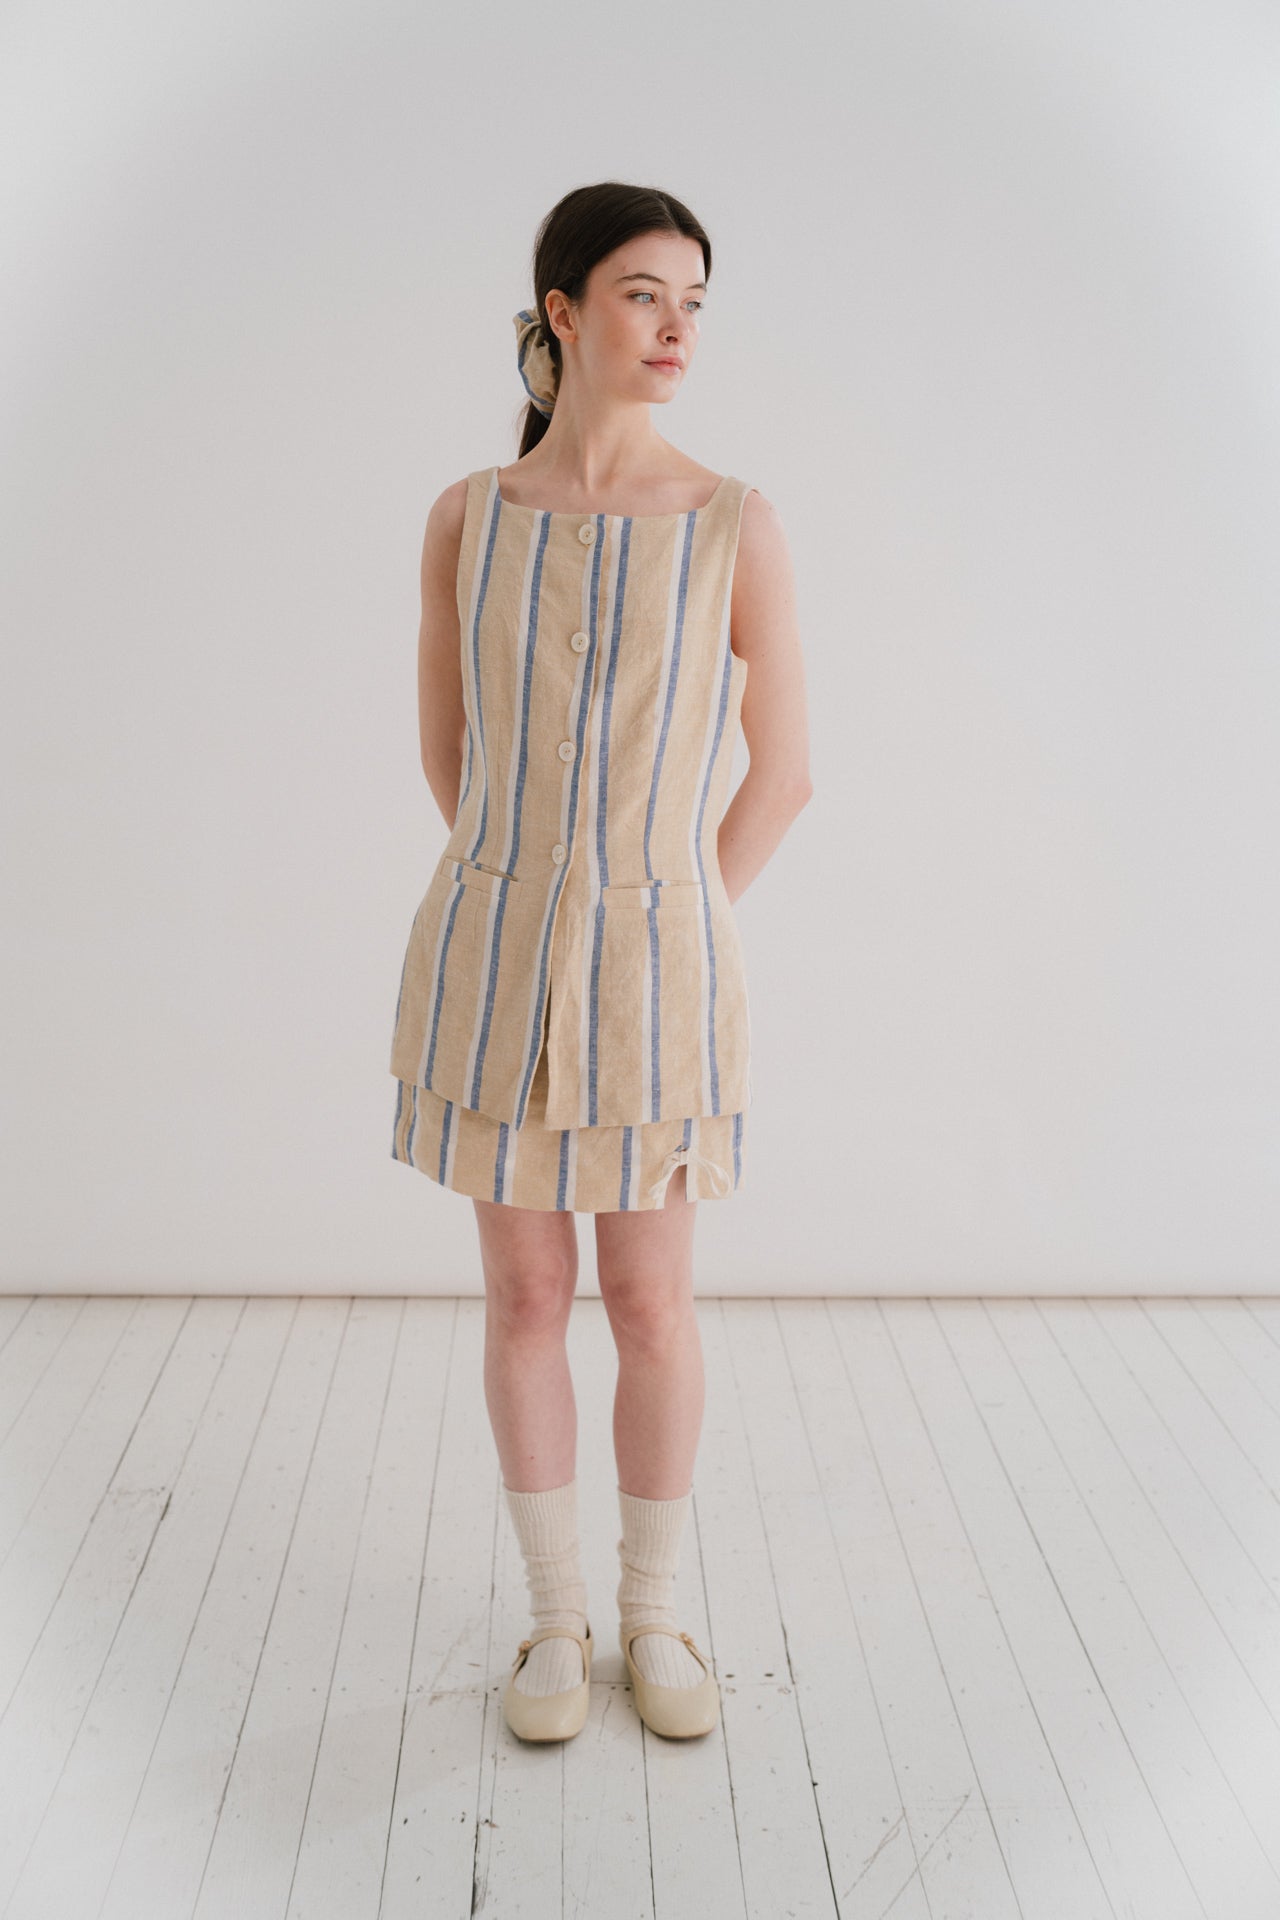 THE MIA MINI - STRIPE | Our very first mini - the Mia skirt has been designed to be the throw on piece that you will continue to reach for this Summer. A delicate bow detail on the front right gives it a little something special. Flat waistband at the fro